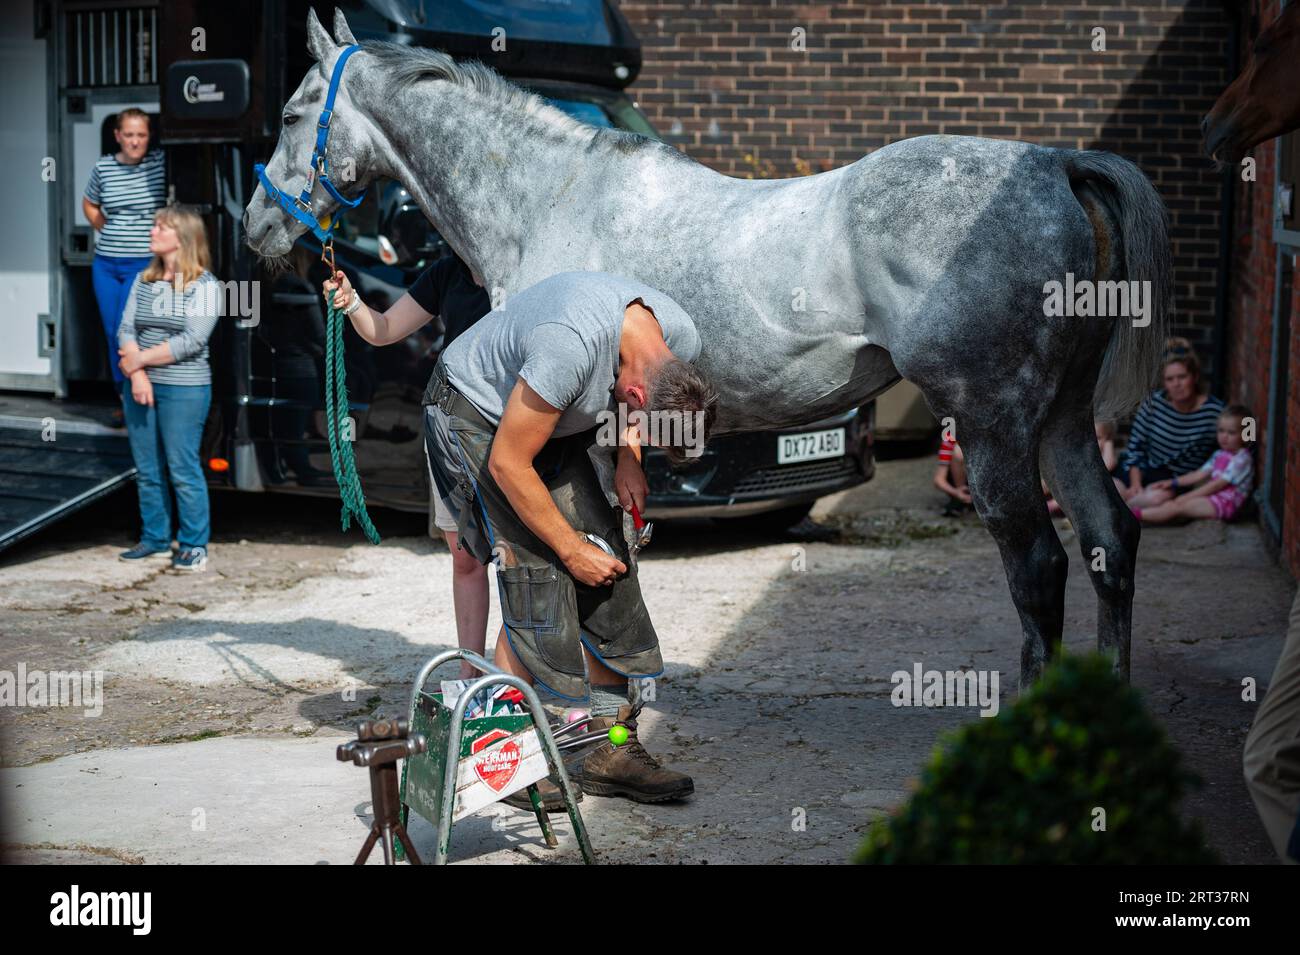 Whitchurch, Shropshire, UK. 10th Sep, 2023. Scenes from the Open Day of Sam Allwood Racing, as part of the National Racehorse Week celebrations. Credit: JTW Equine Images/Alamy Live News Stock Photo